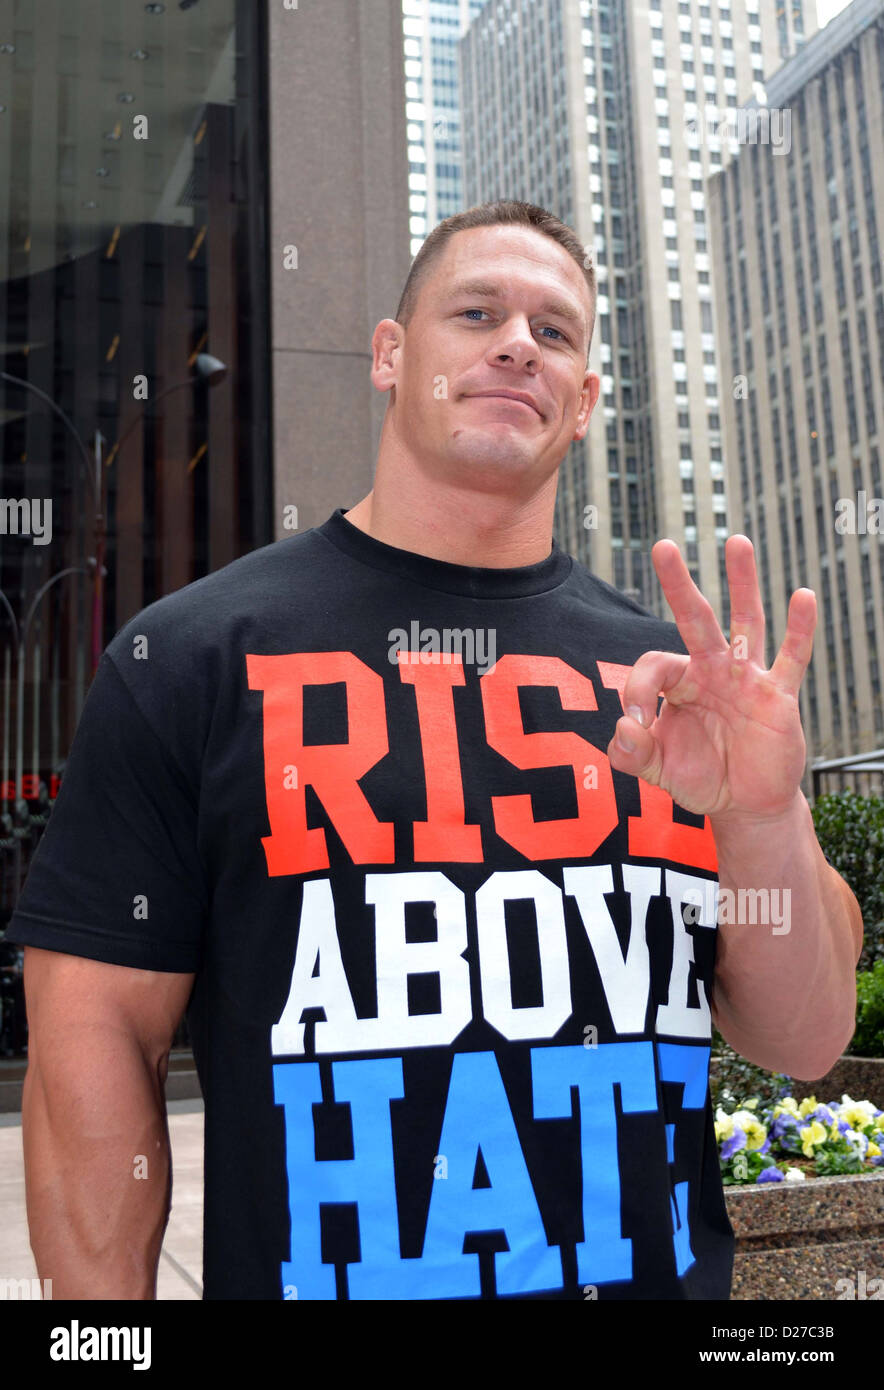 Wrestler John Cena photographed in Midtown Manhattan wearing a RISE ABOVE HATE t-shirt Stock Photo